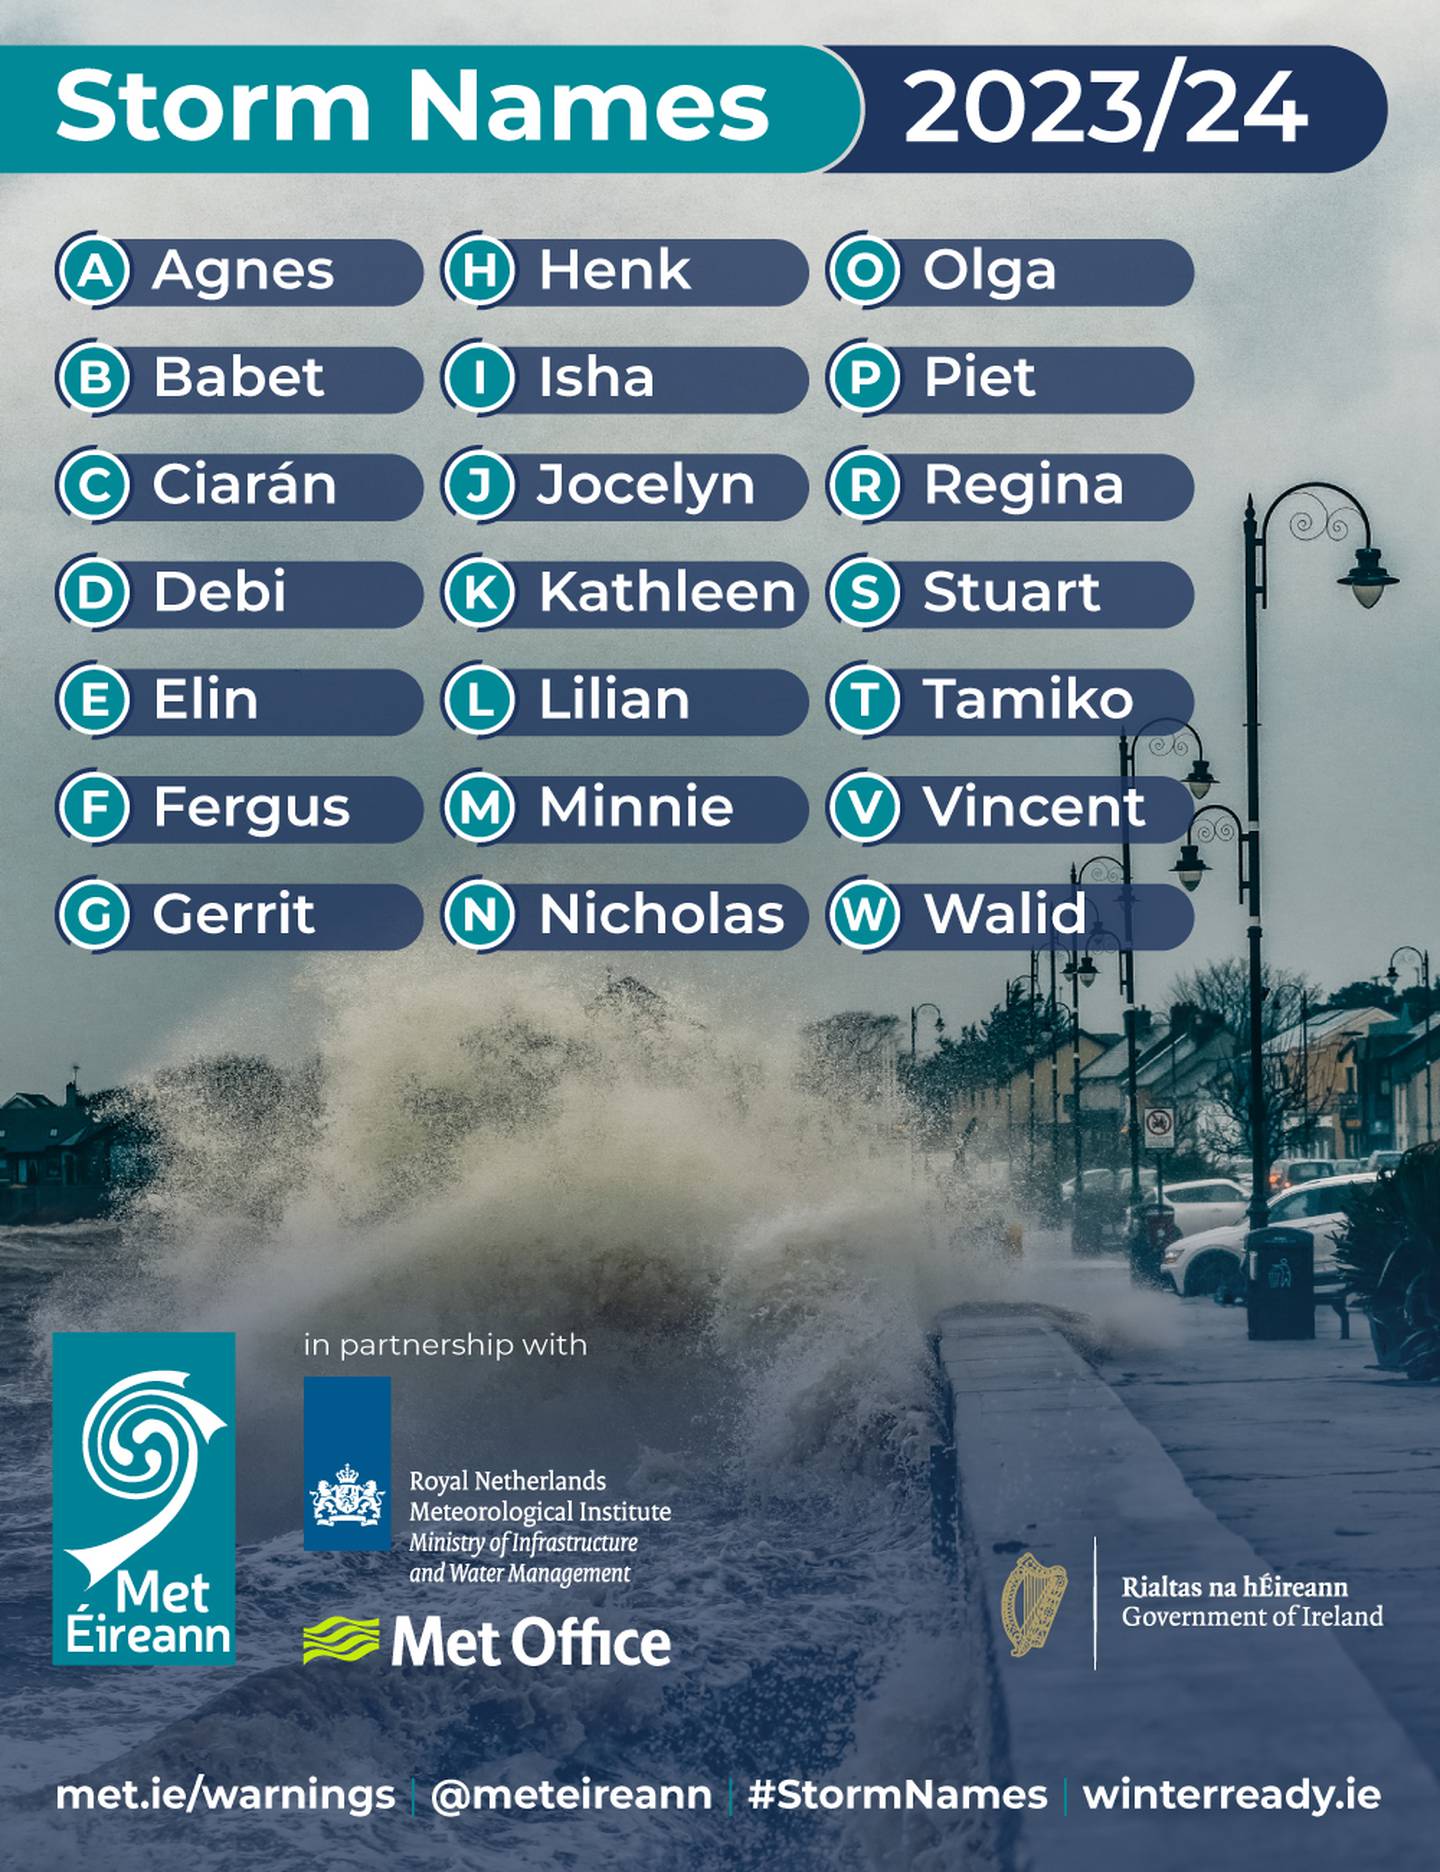 What’s in a name? Met Éireann reveals monikers for newseason storms